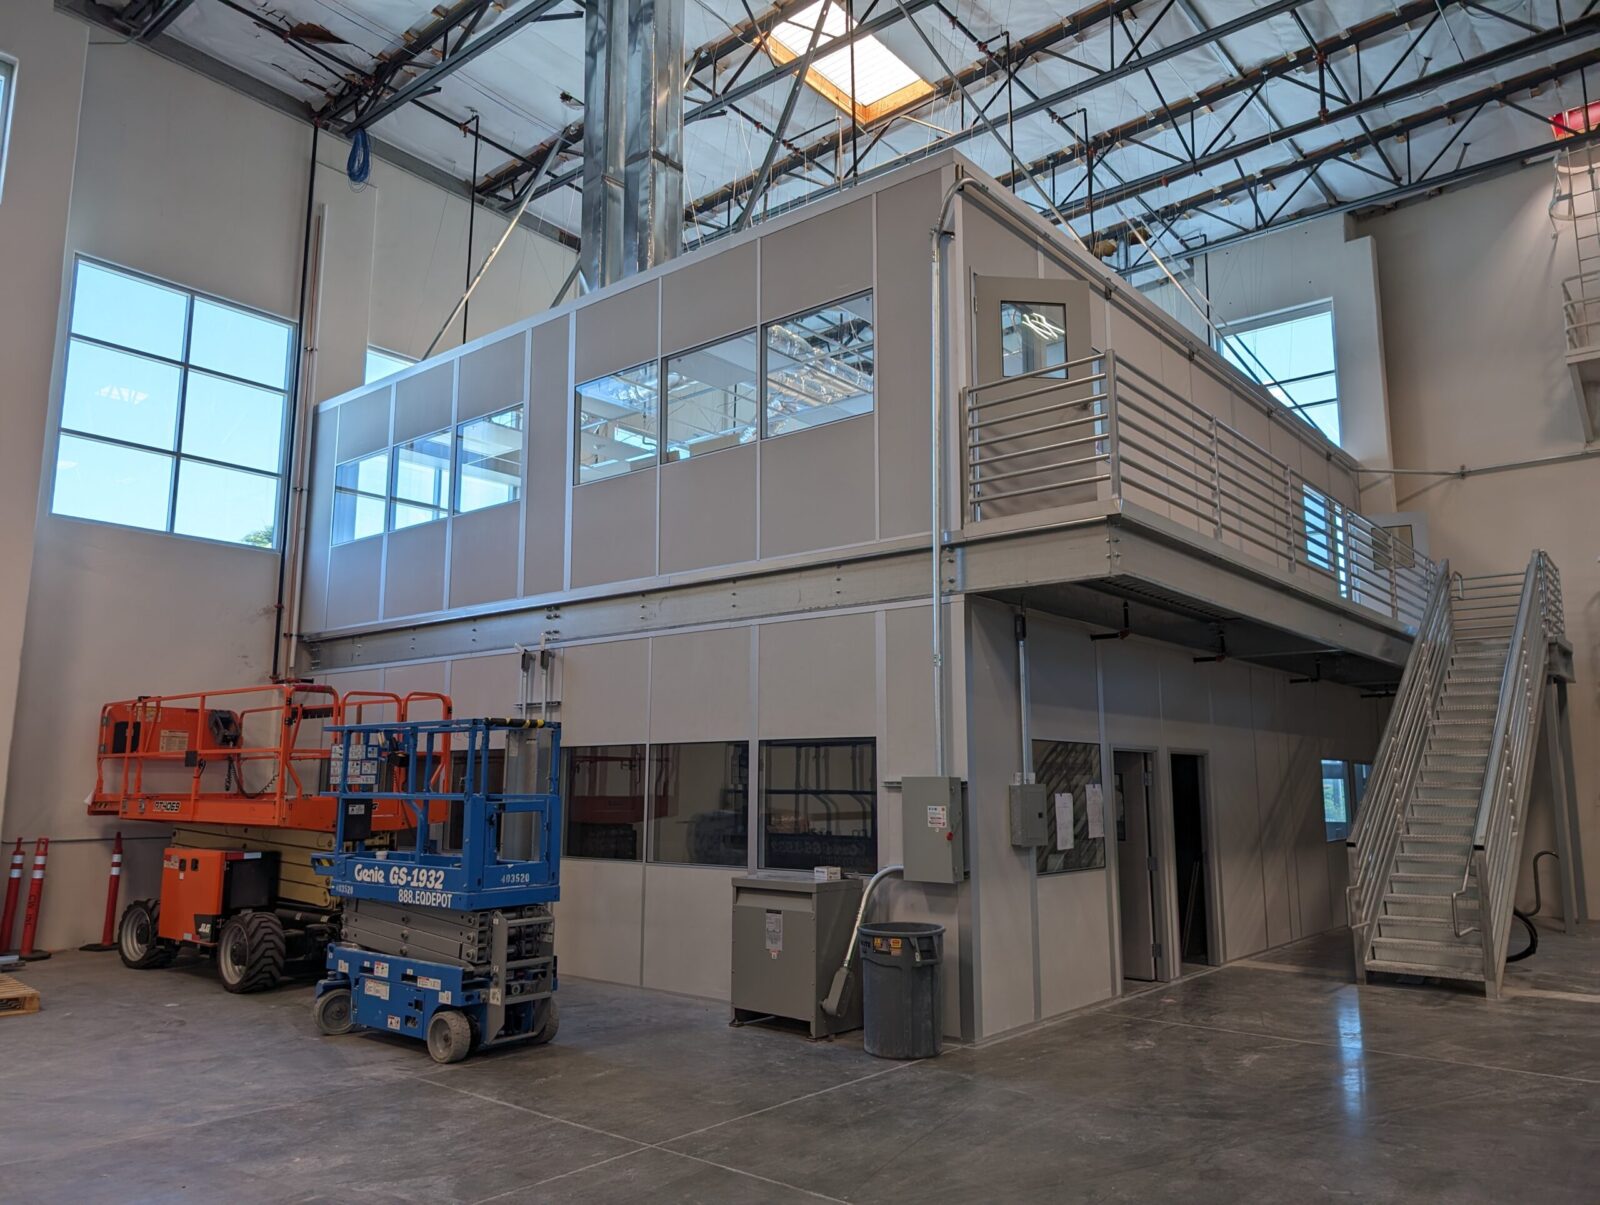 A two-story building made with modular construction methods.